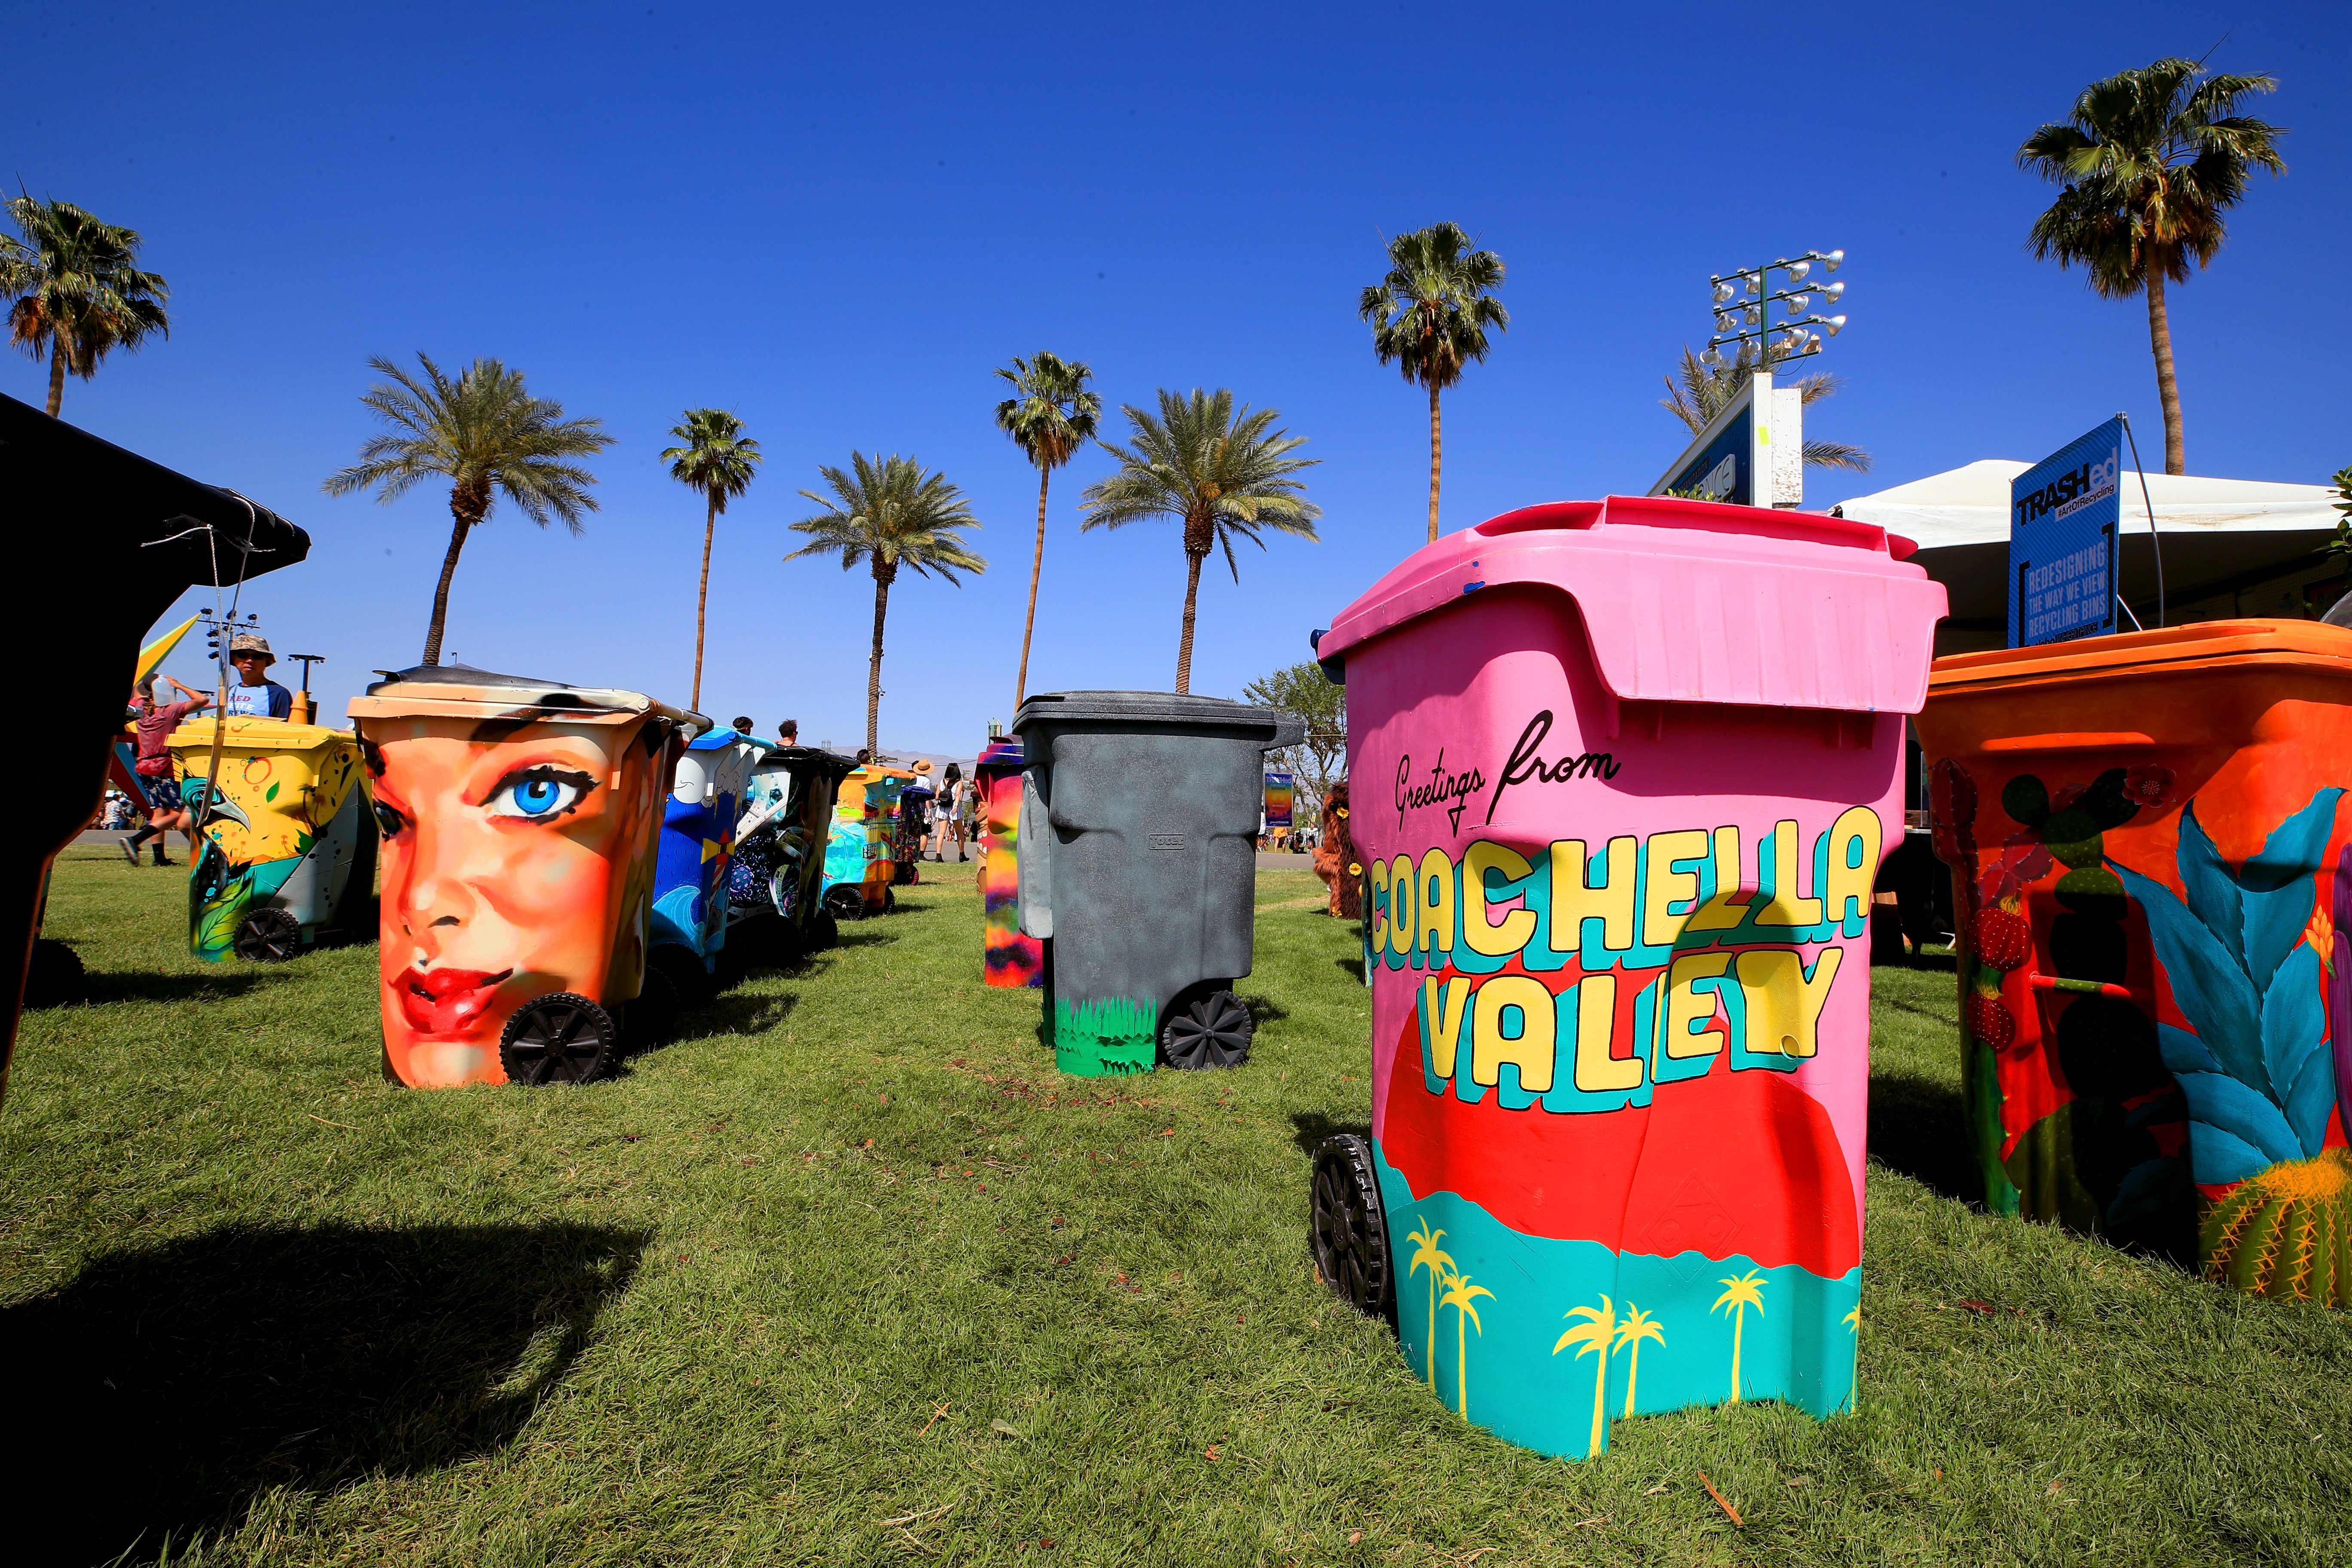 Coachella’s many flaws highlight just how good we have it when it comes to festivals in the UK